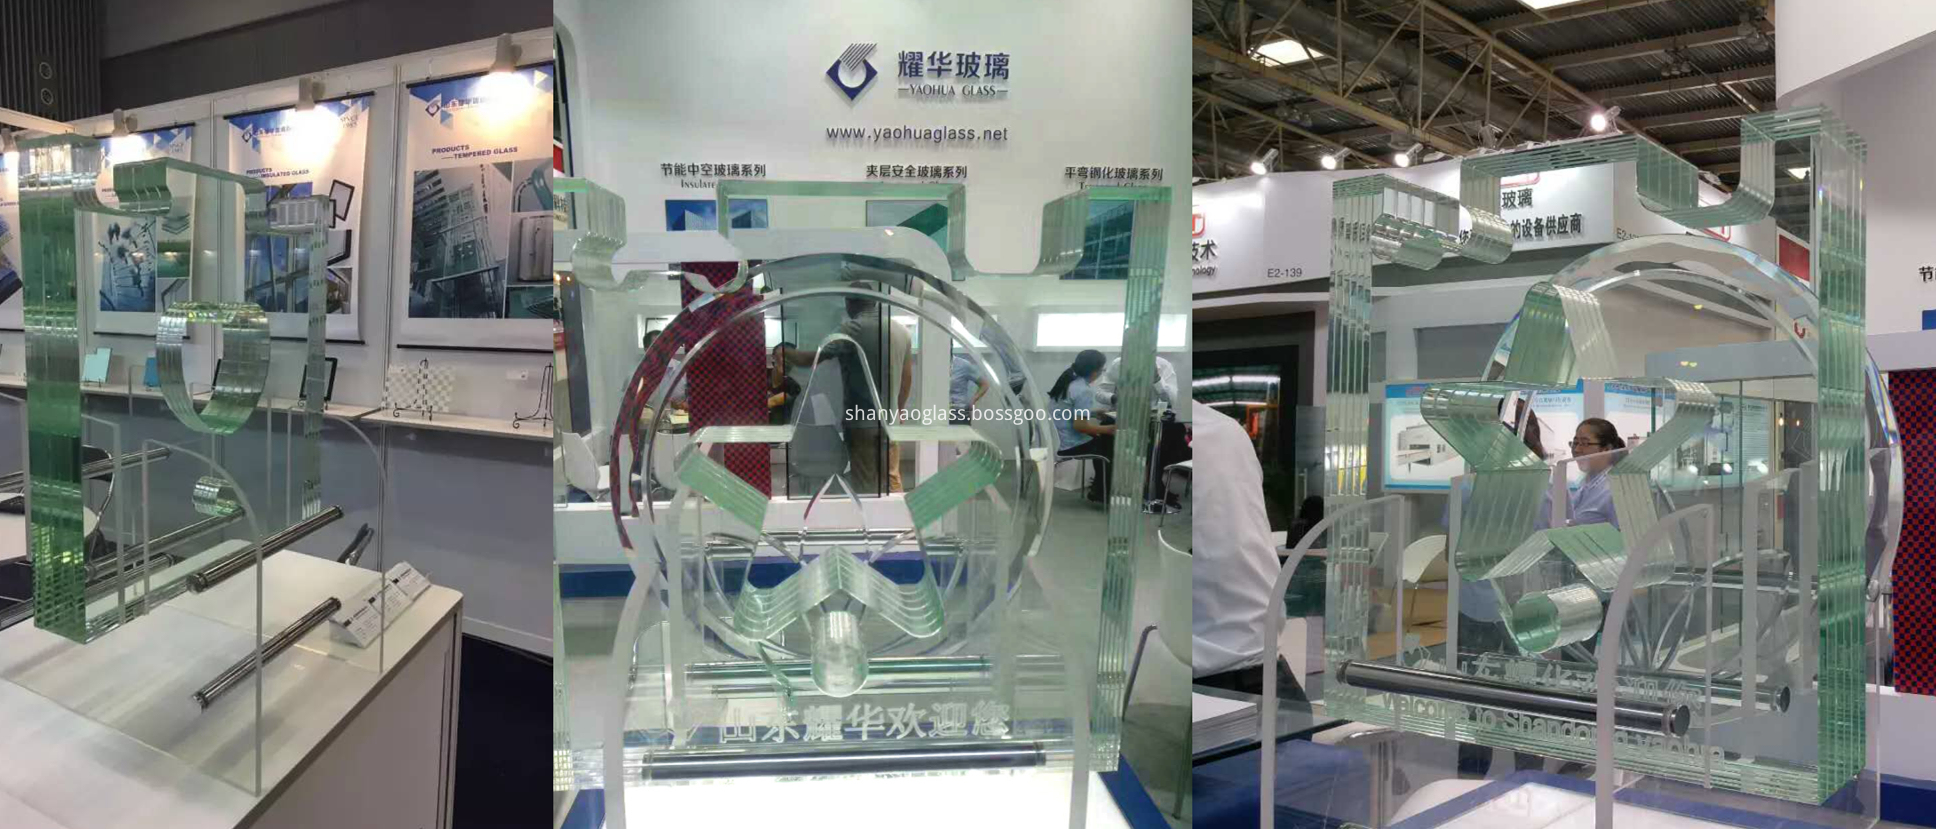 Insulated Glass Supplier